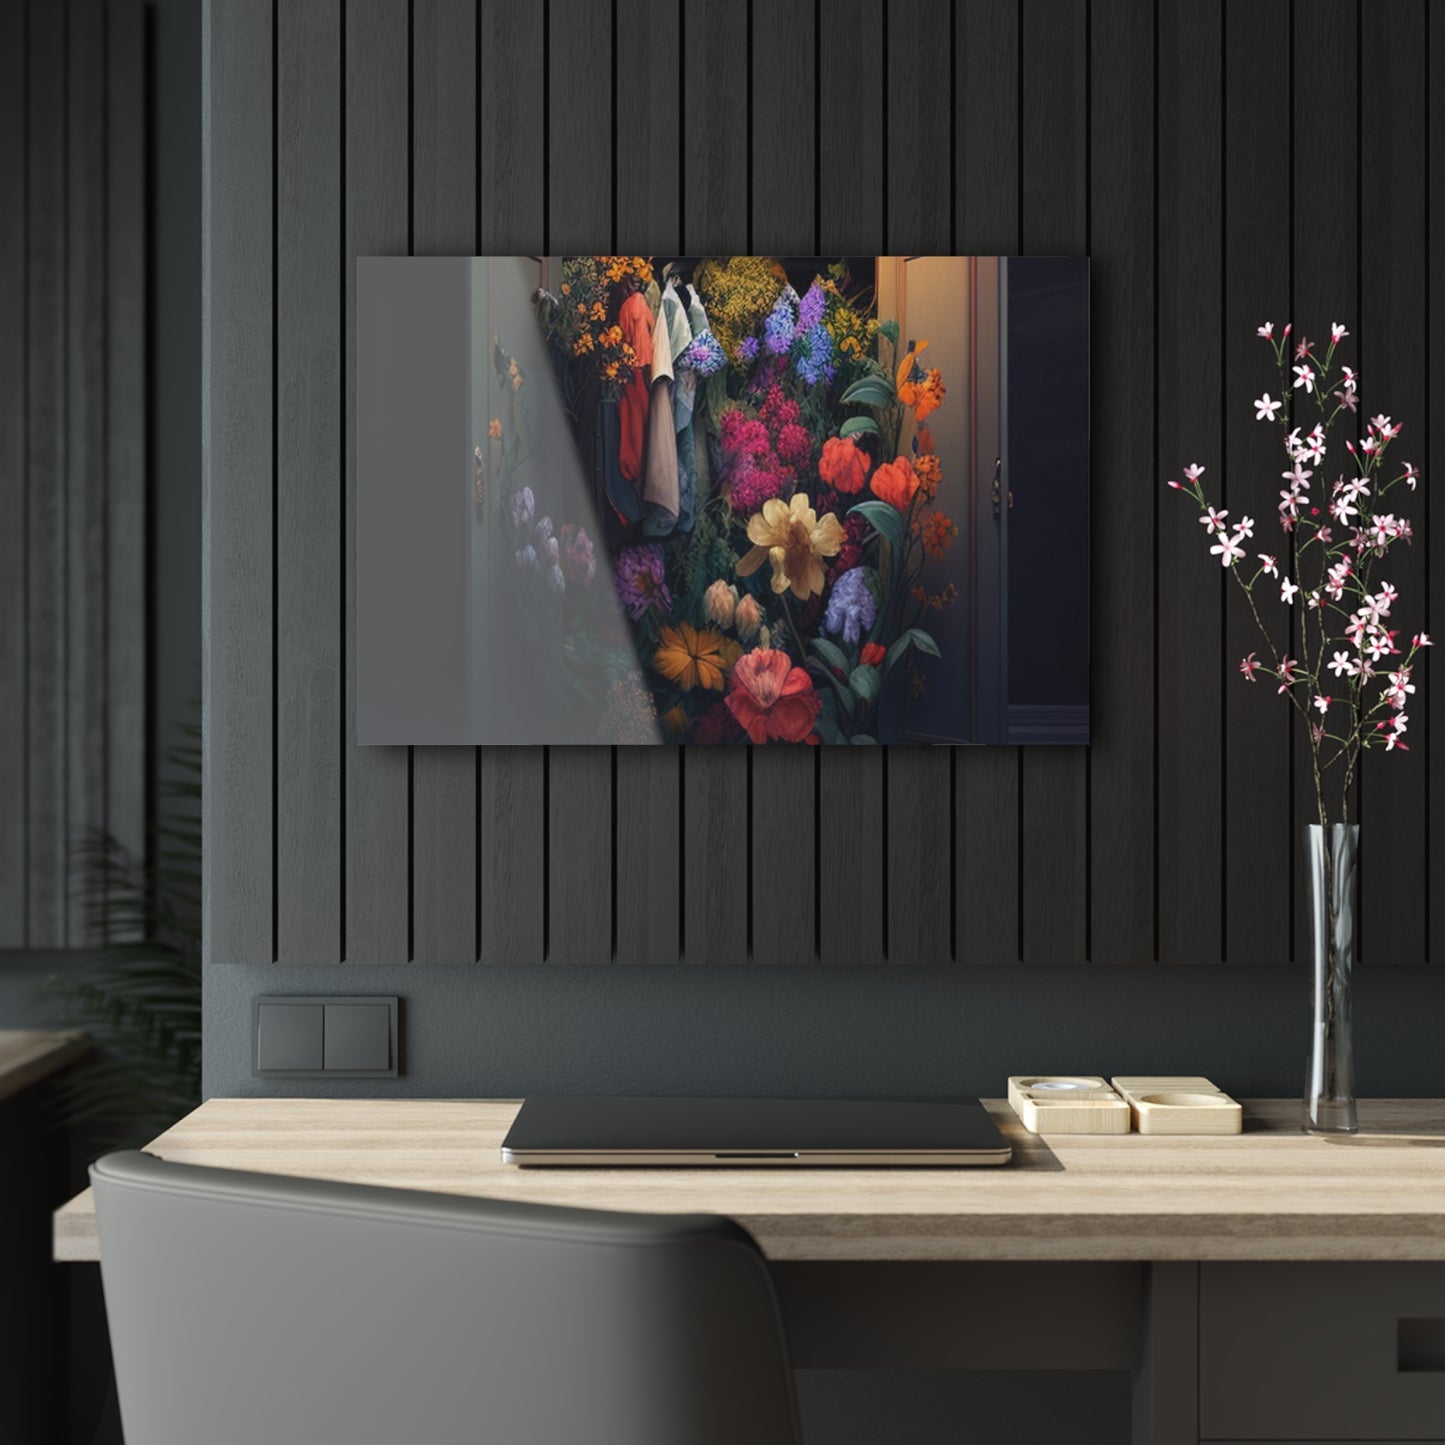 Acrylic Prints A Wardrobe Surrounded by Flowers 4